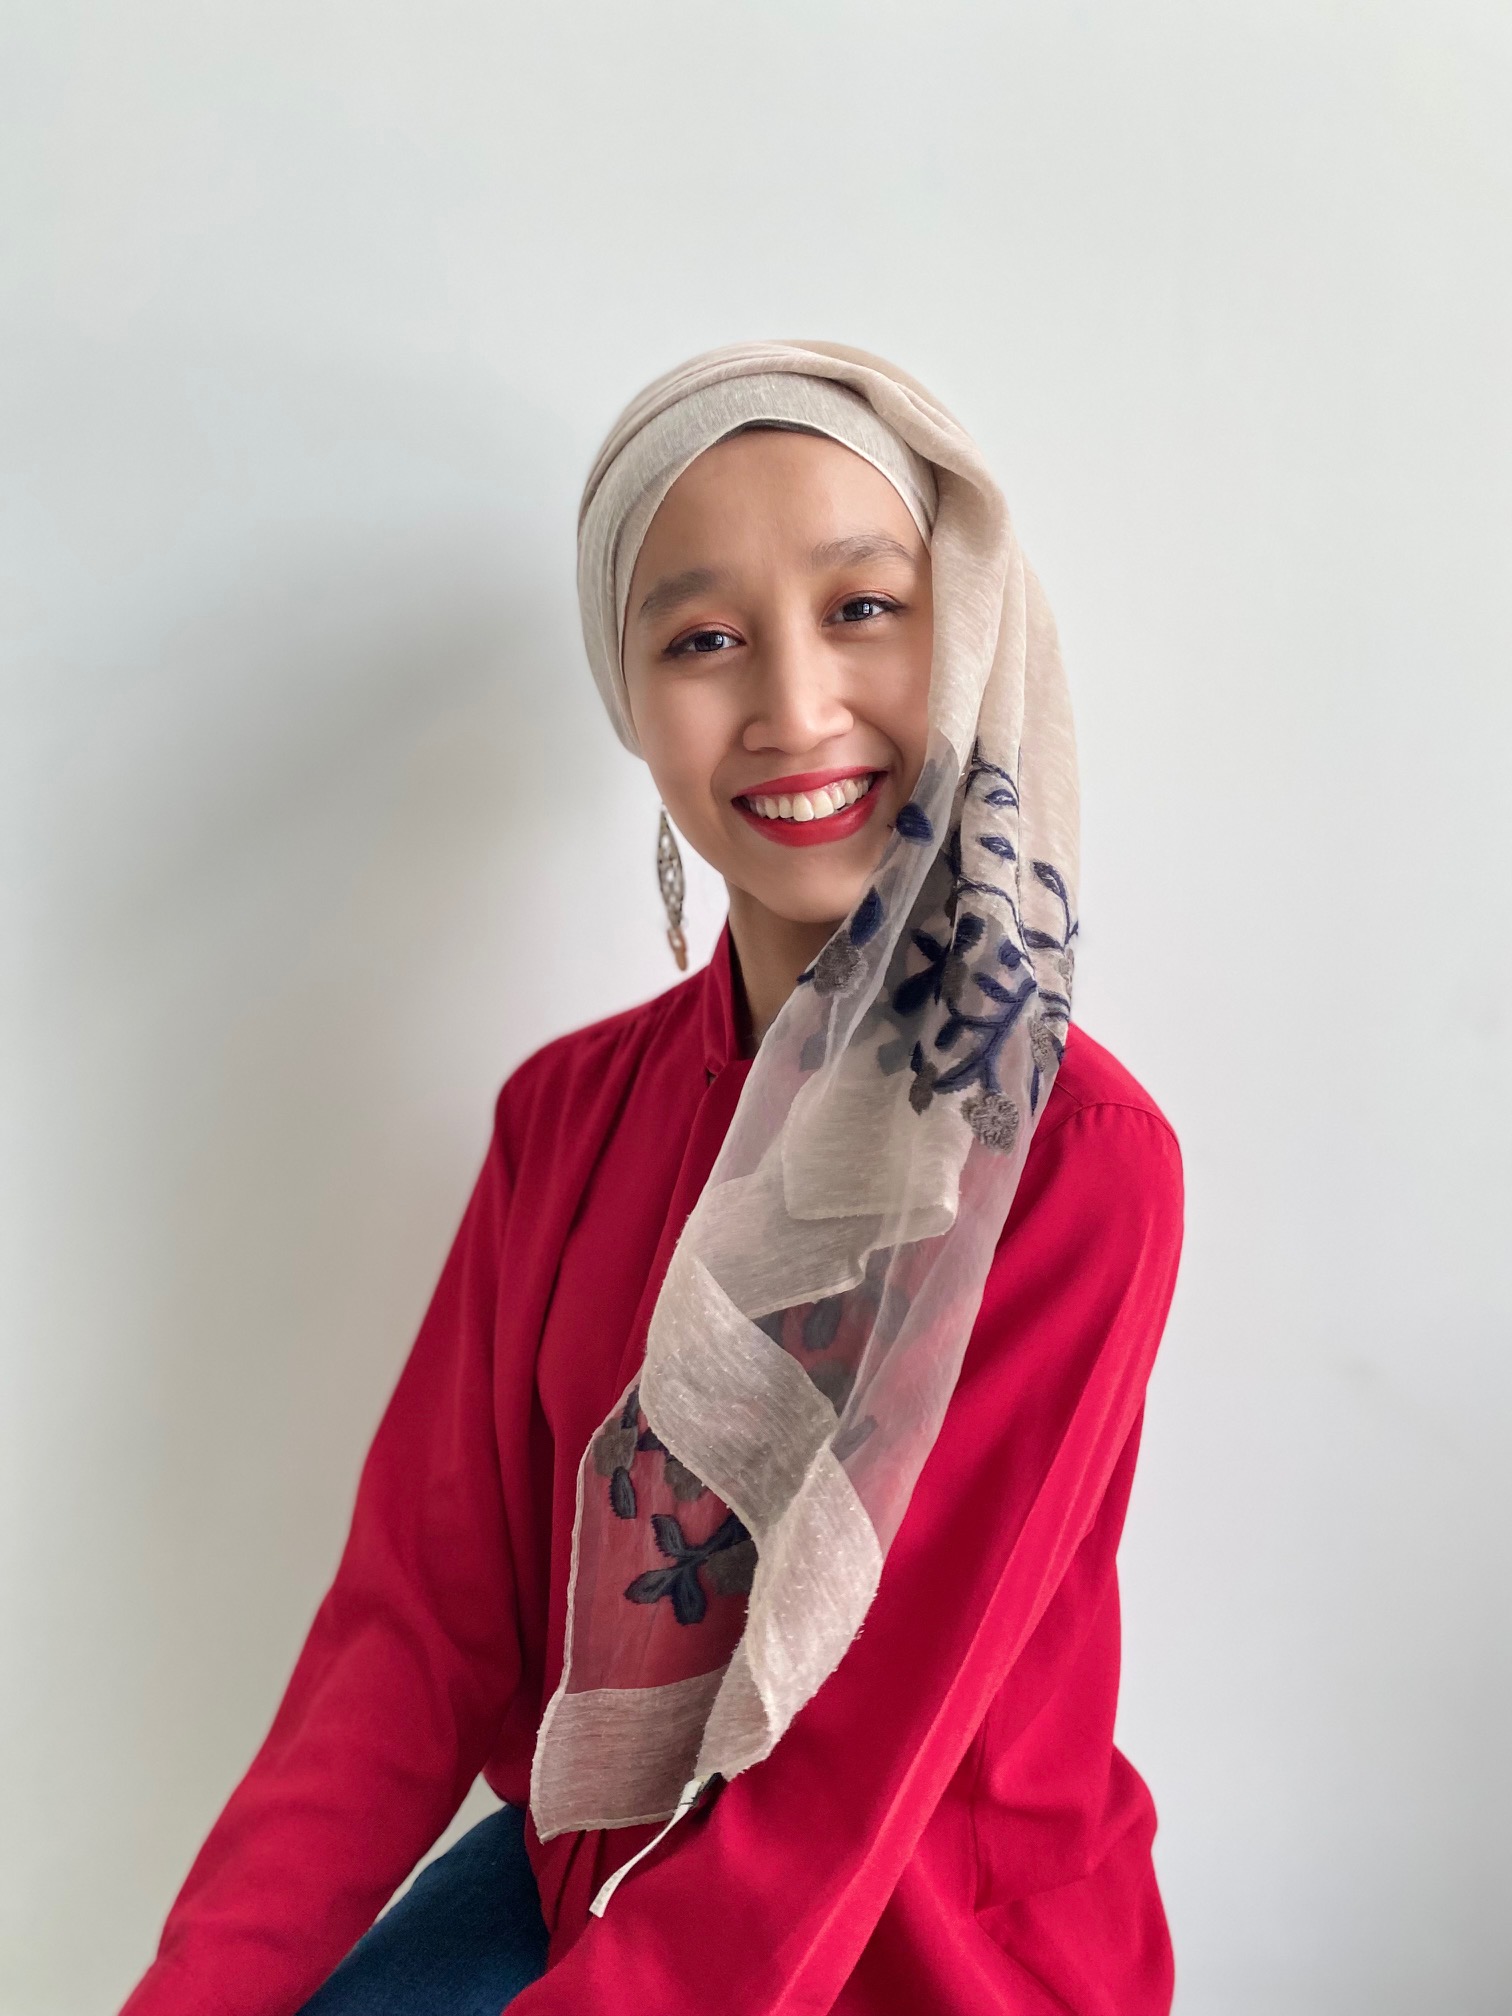 Raudhah facing the camera and smiling, she is sat in front of a white wall.